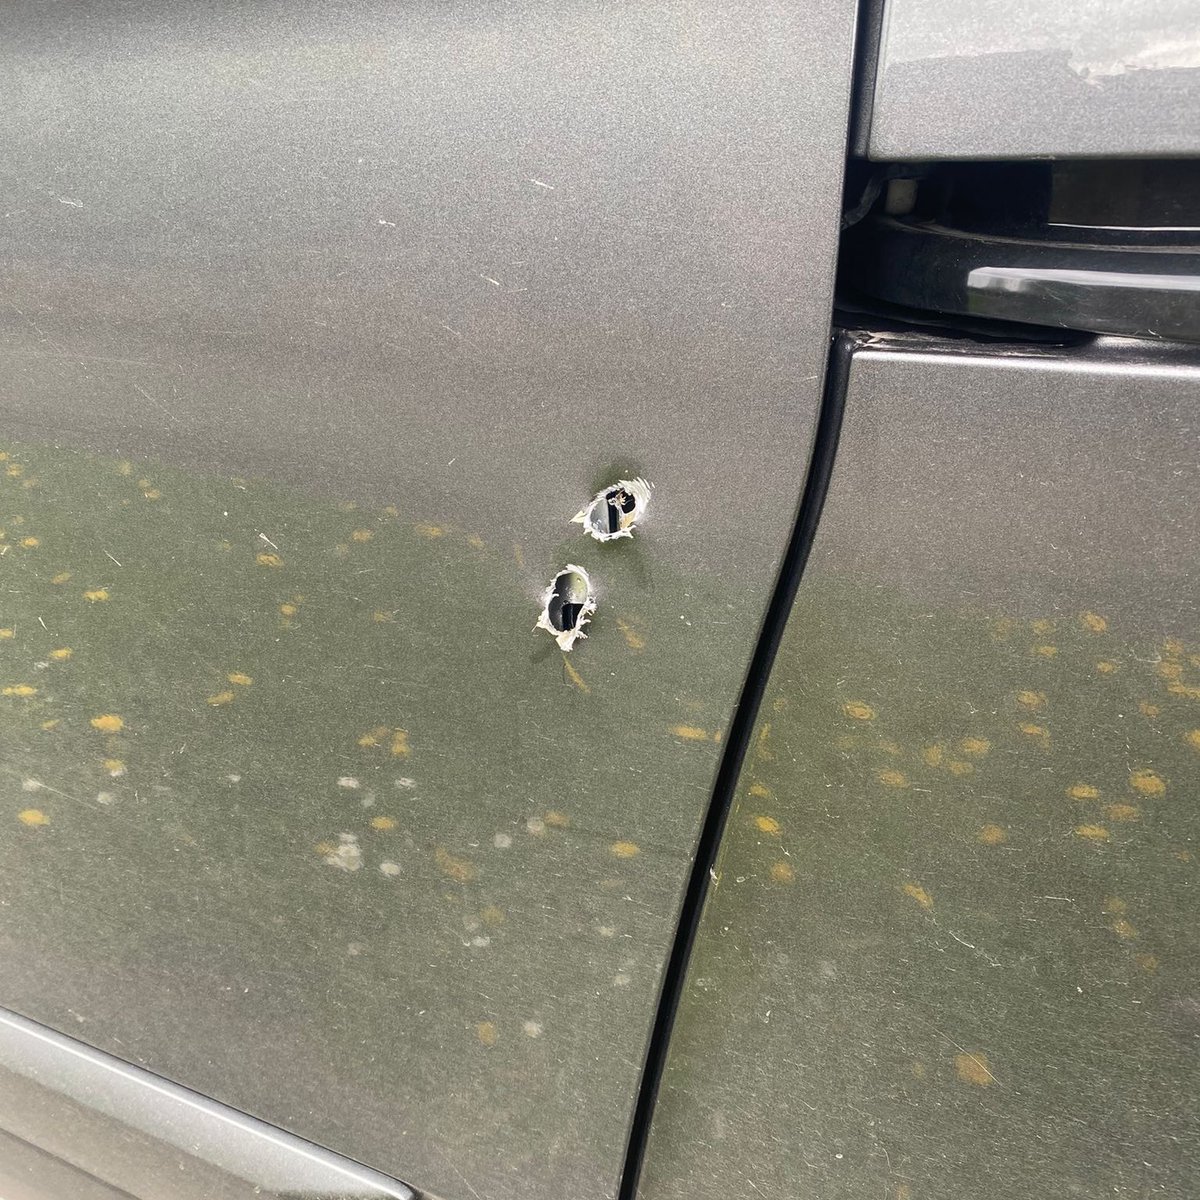 📢Please keep an eye on vans.
My chap added deadlocks after all his tools got nicked. Now the scrotes in balaclavas on stolen motorbikes are cutting wires & forcing deadlocks. This was outside a job. Garage had 8 in same! People trying to earn a living.